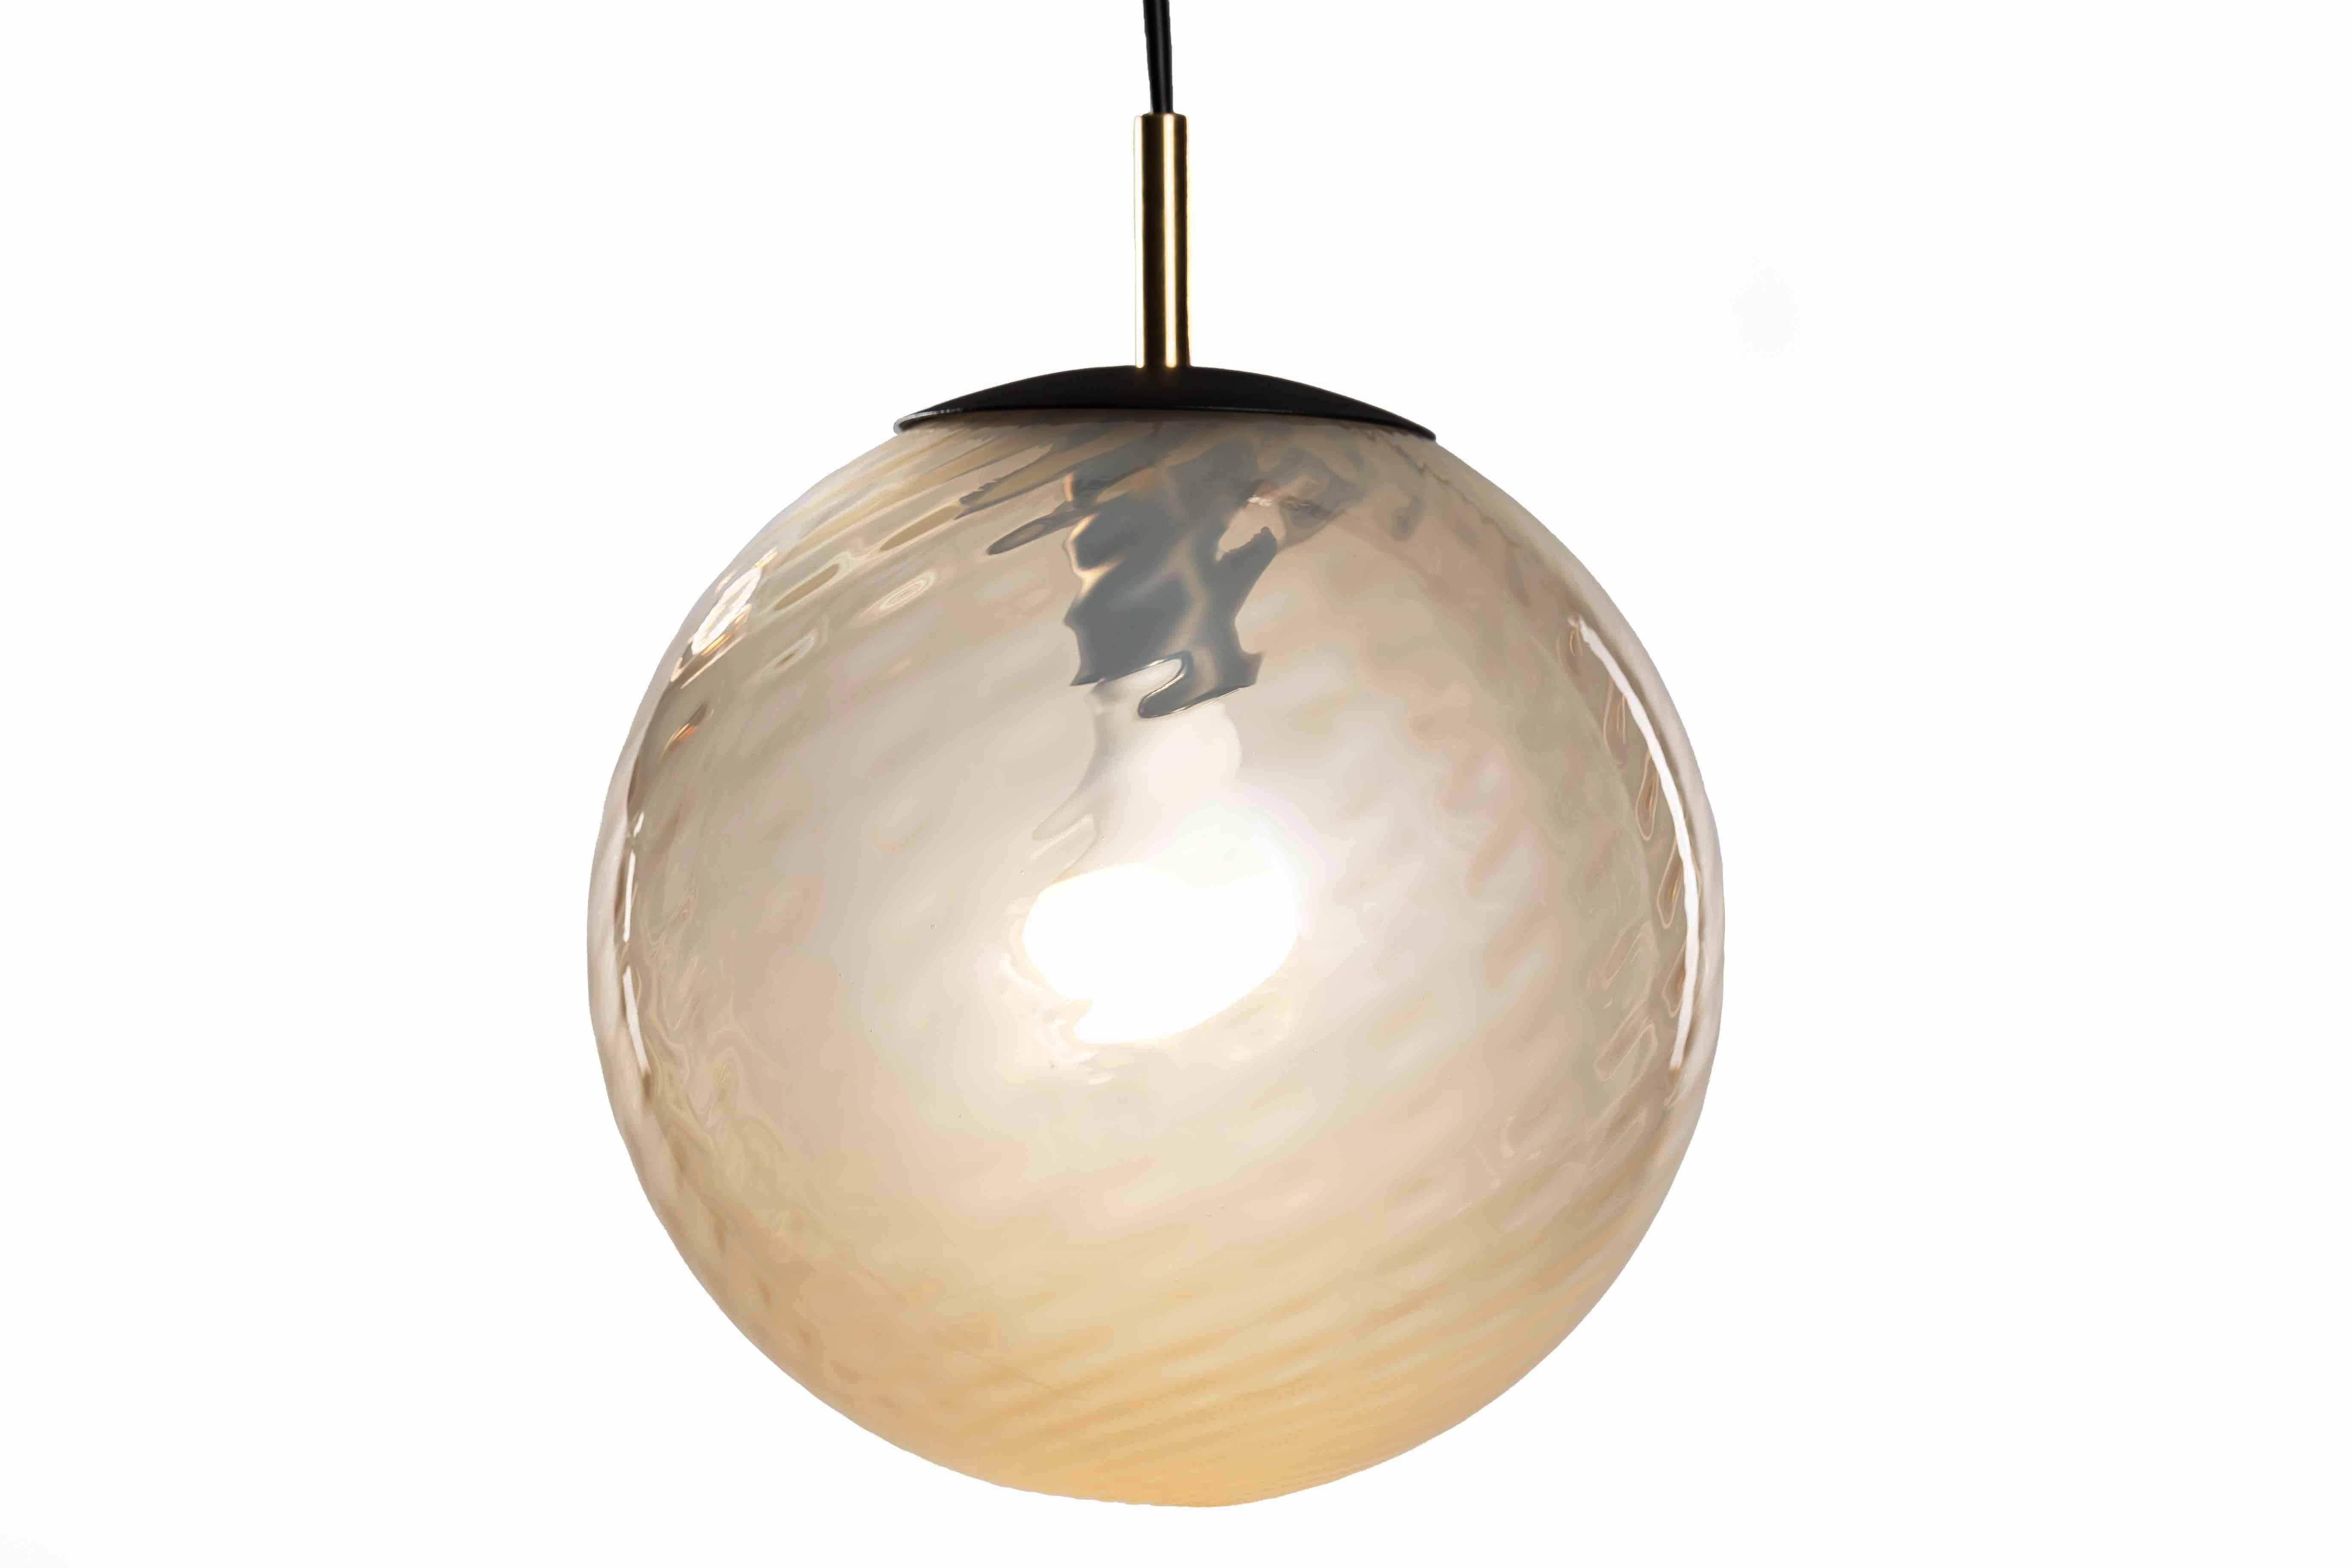 The new Astro range from Luminosa - a range of architectural glass lamps in translucent fawn with optical twist. Classical yet modern these little pearls suit just about every environment. cord-set and matching canopy are powder-coated black with